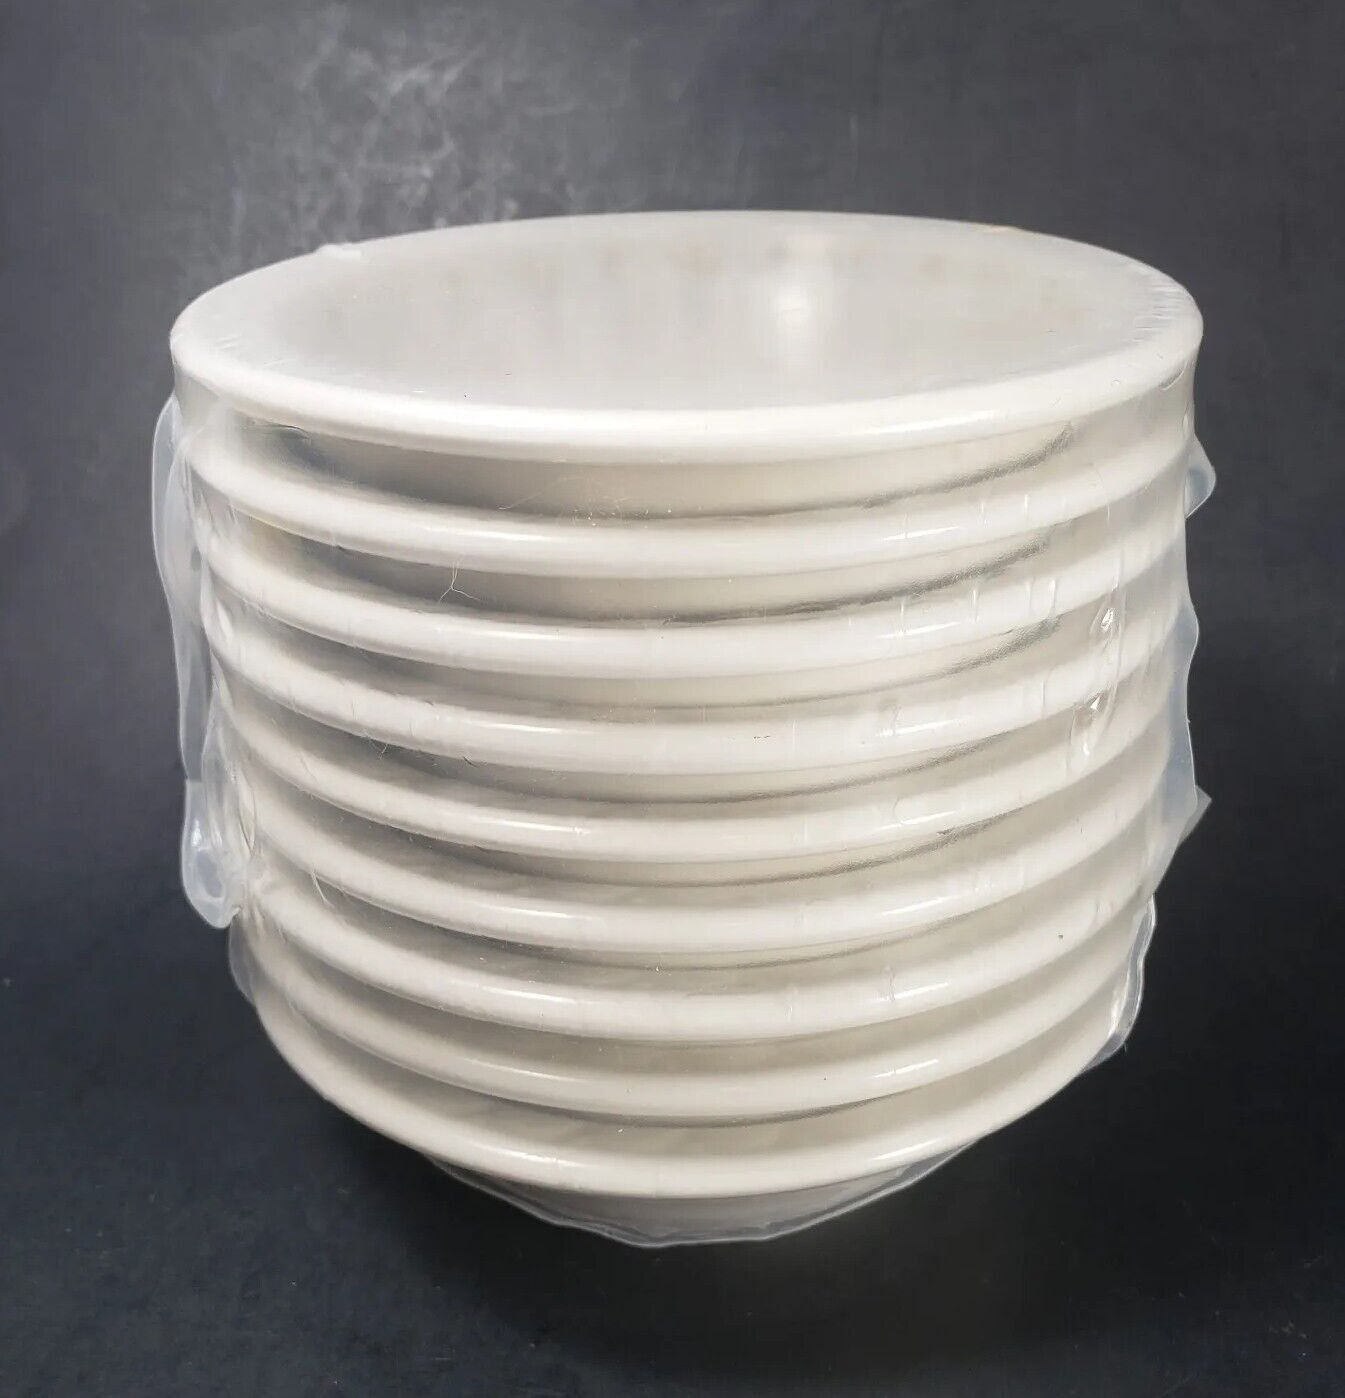 4 VTG NOS WHITE IRONSTONE THICK RESTAURANTWARE BUTTER PATS / BERRY BOWL SYRACUSE